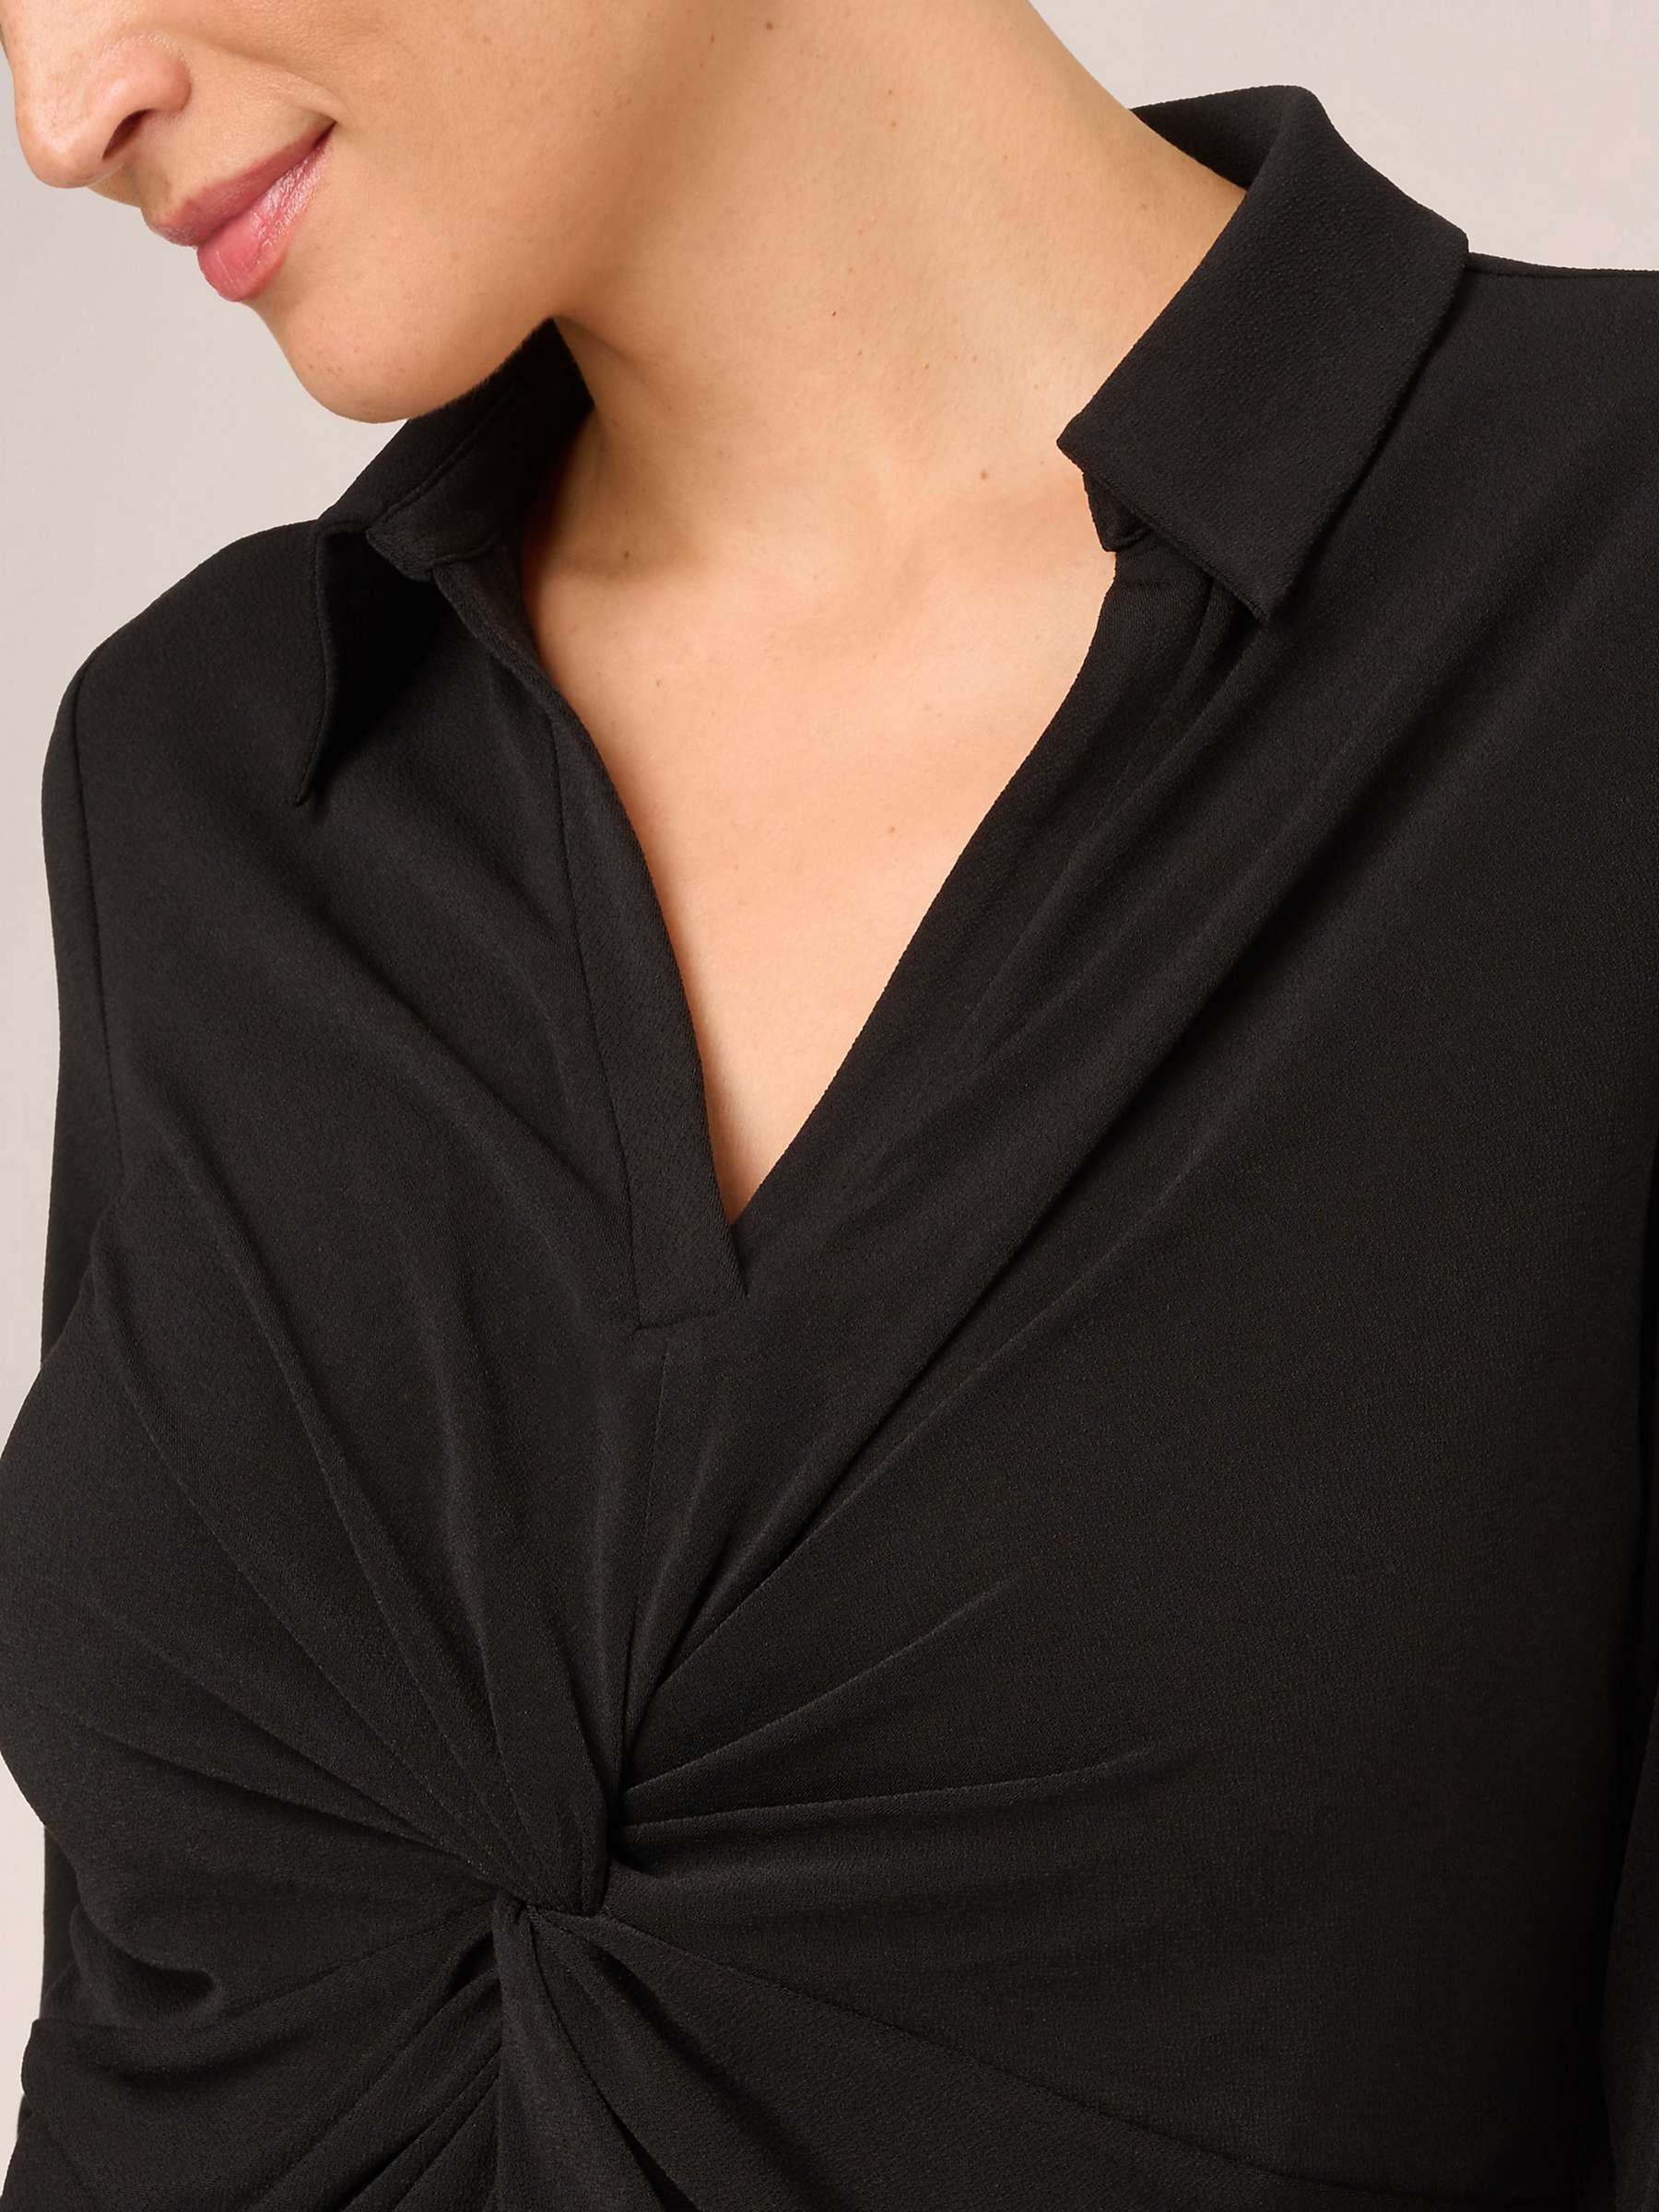 Buy Adrianna Papell Long Sleeve Twist Front Shirt, Black Online at johnlewis.com